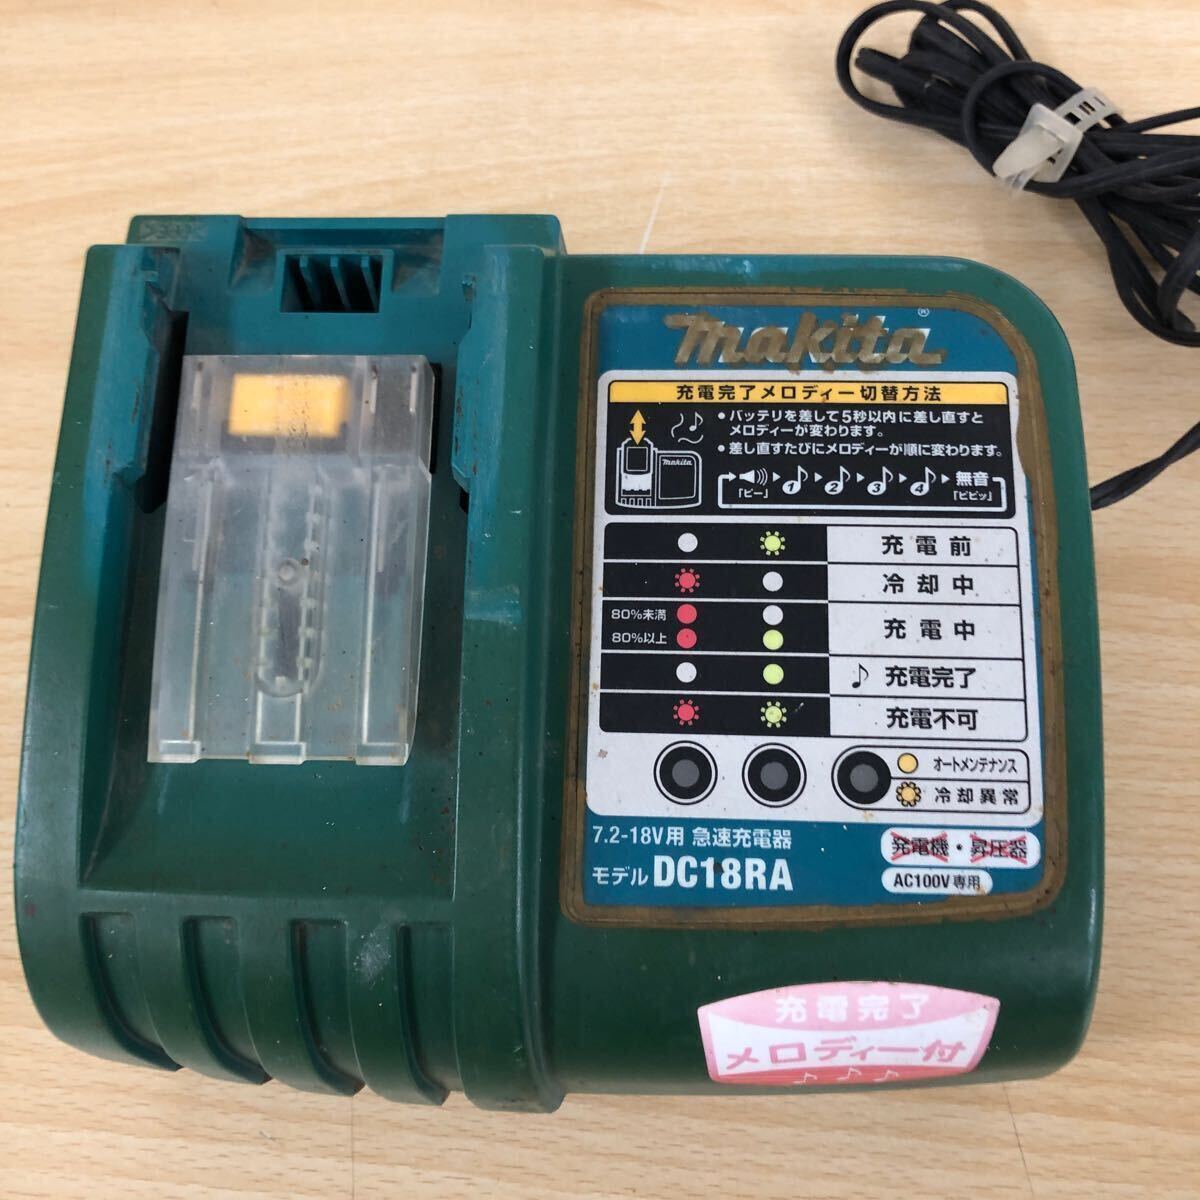  secondhand goods Makita makita battery 18V 2 piece attaching pattern number unknown charger DC18RAT case attaching 18V for battery tool * power tool 